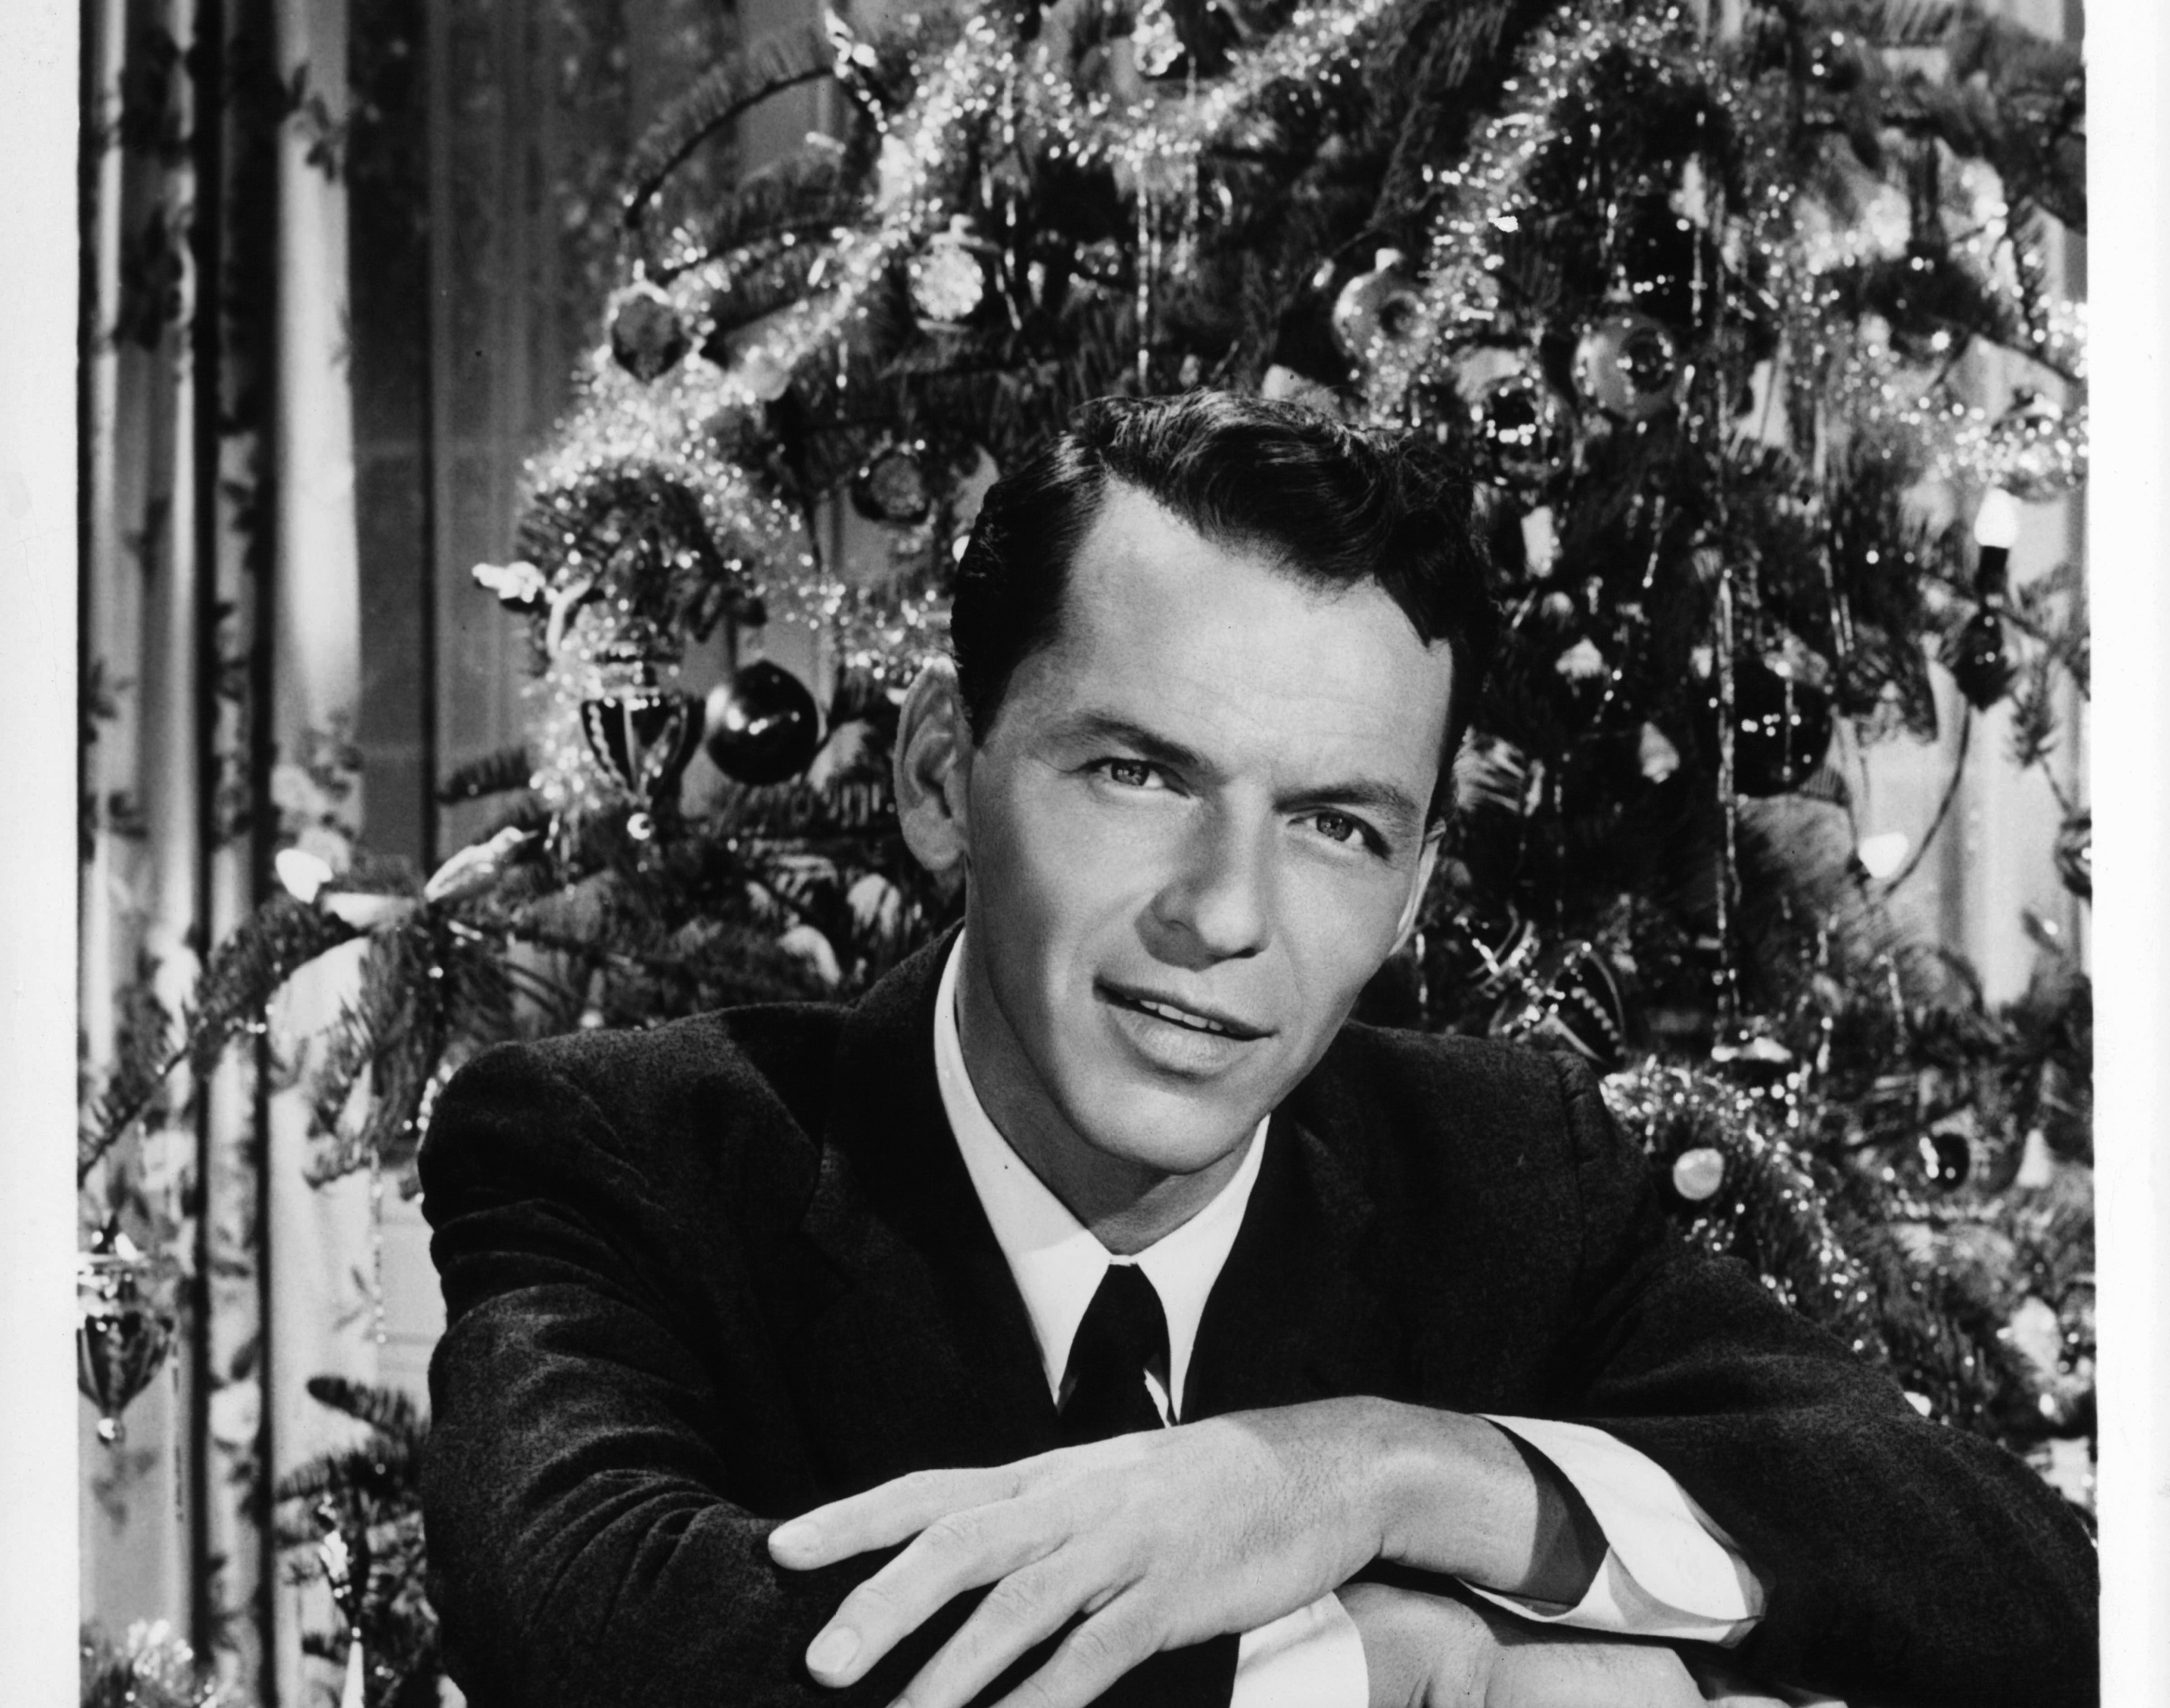 Frank Sinatra wears a suit and sits in front of a Christmas tree.